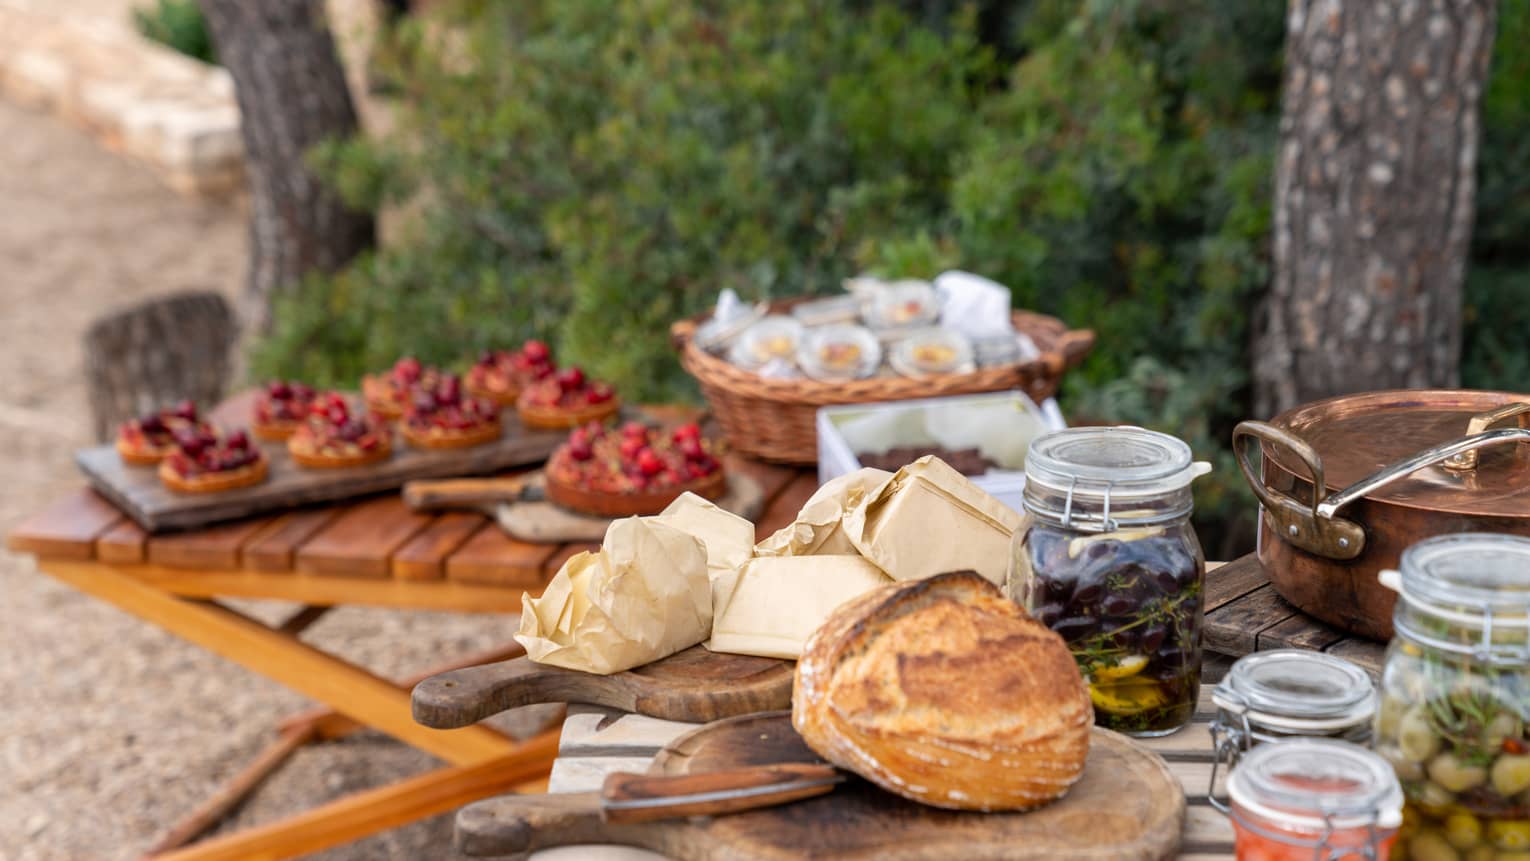 Amid trees and shrubs, a picnic featuring jars of green and black olives, fresh bread over a cutting board and fruit tarts.